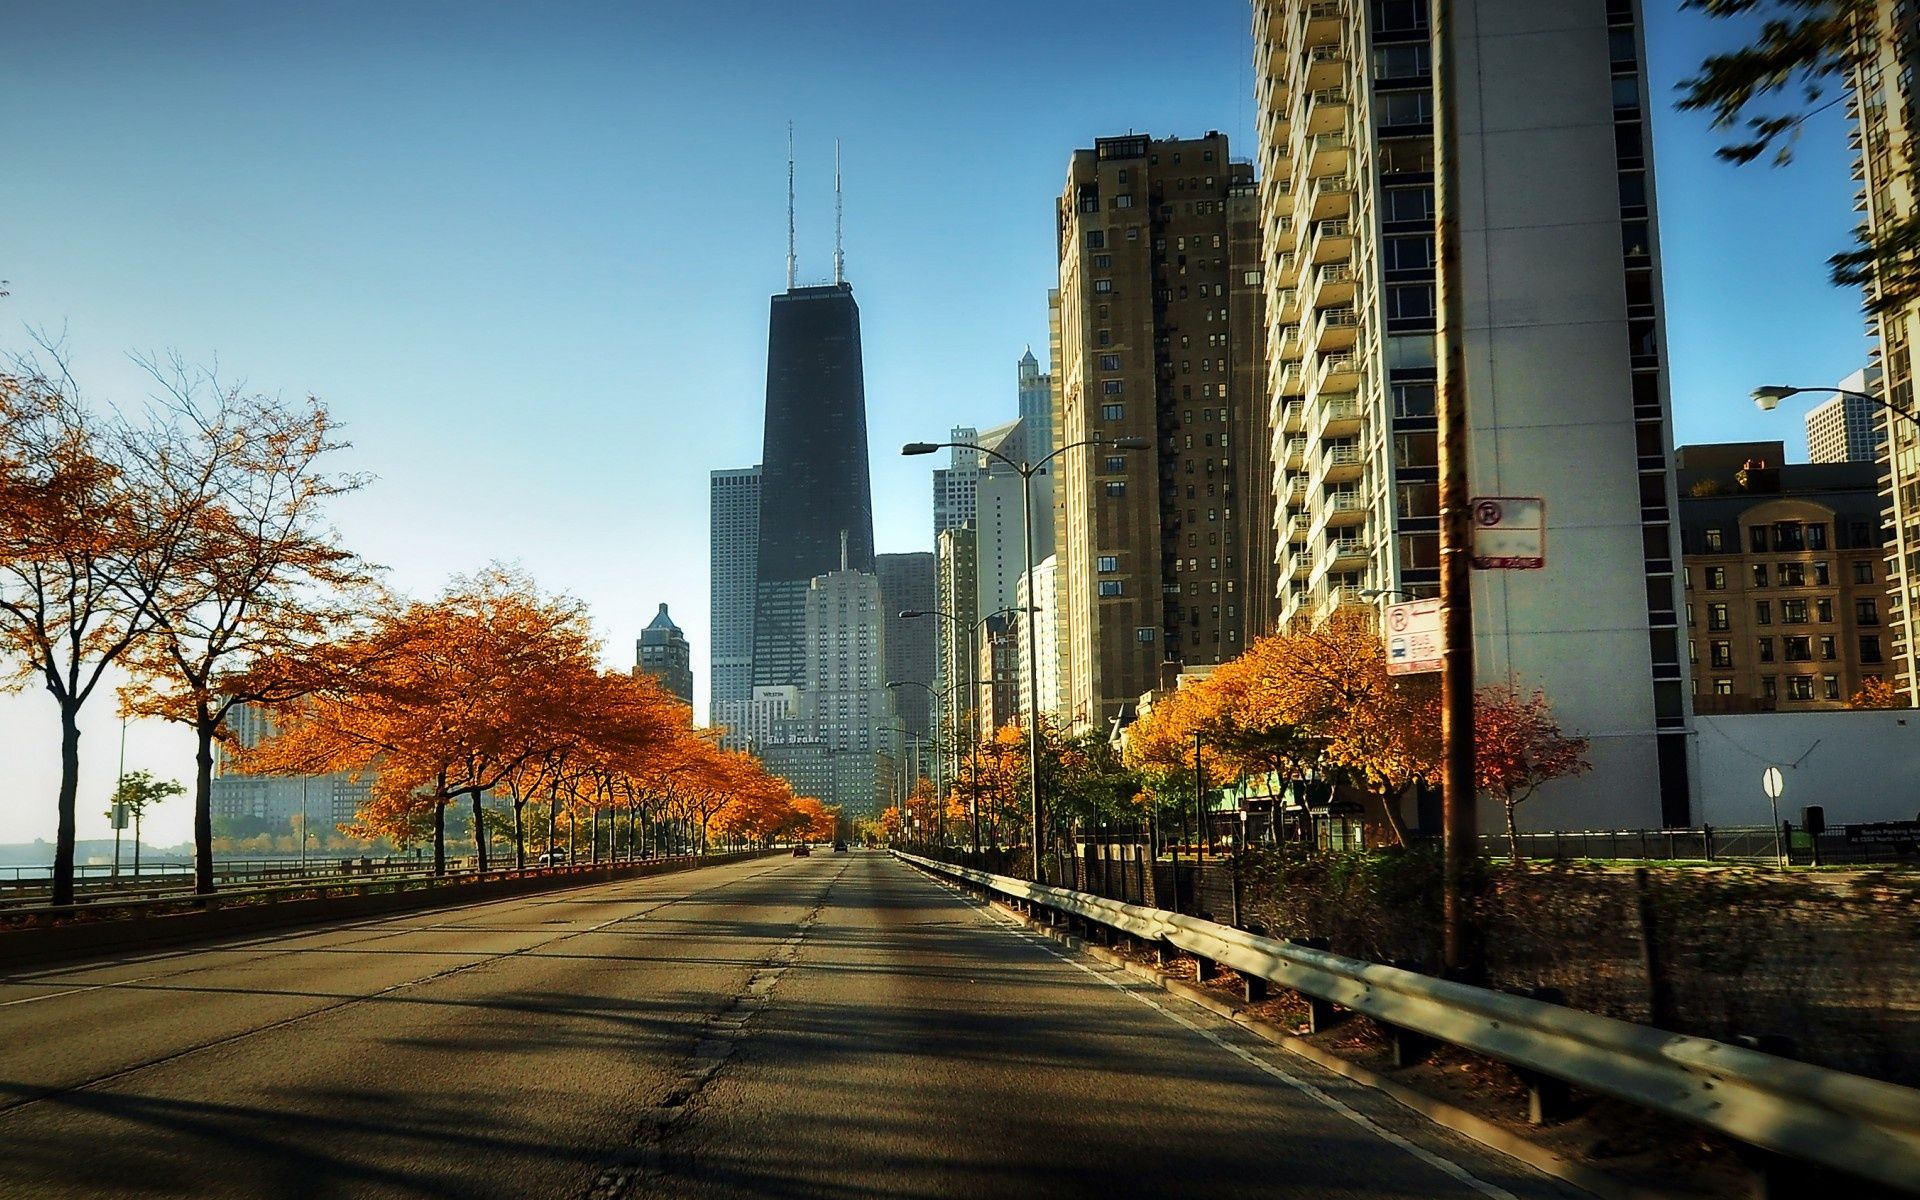 A road with trees and buildings in the background - Chicago